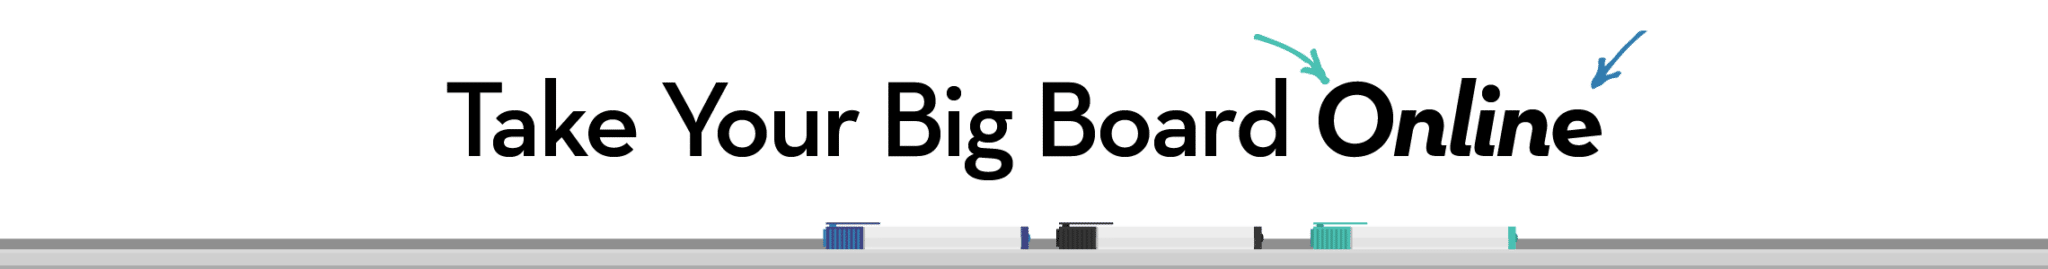 5-take-your-big-board-online